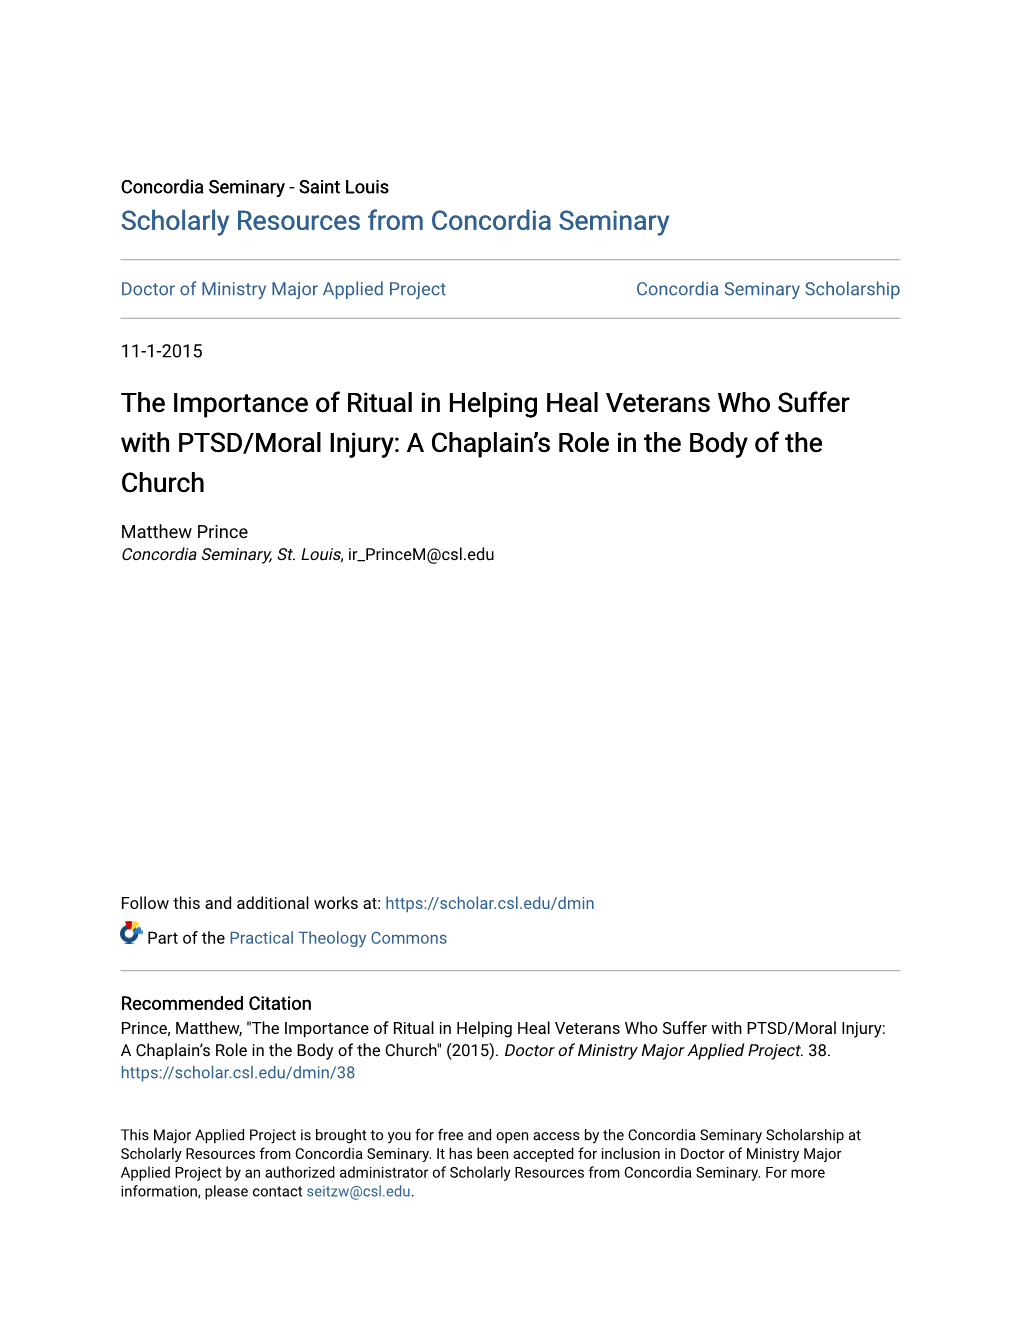 The Importance of Ritual in Helping Heal Veterans Who Suffer with PTSD/Moral Injury: a Chaplain's Role in the Body of the Chur